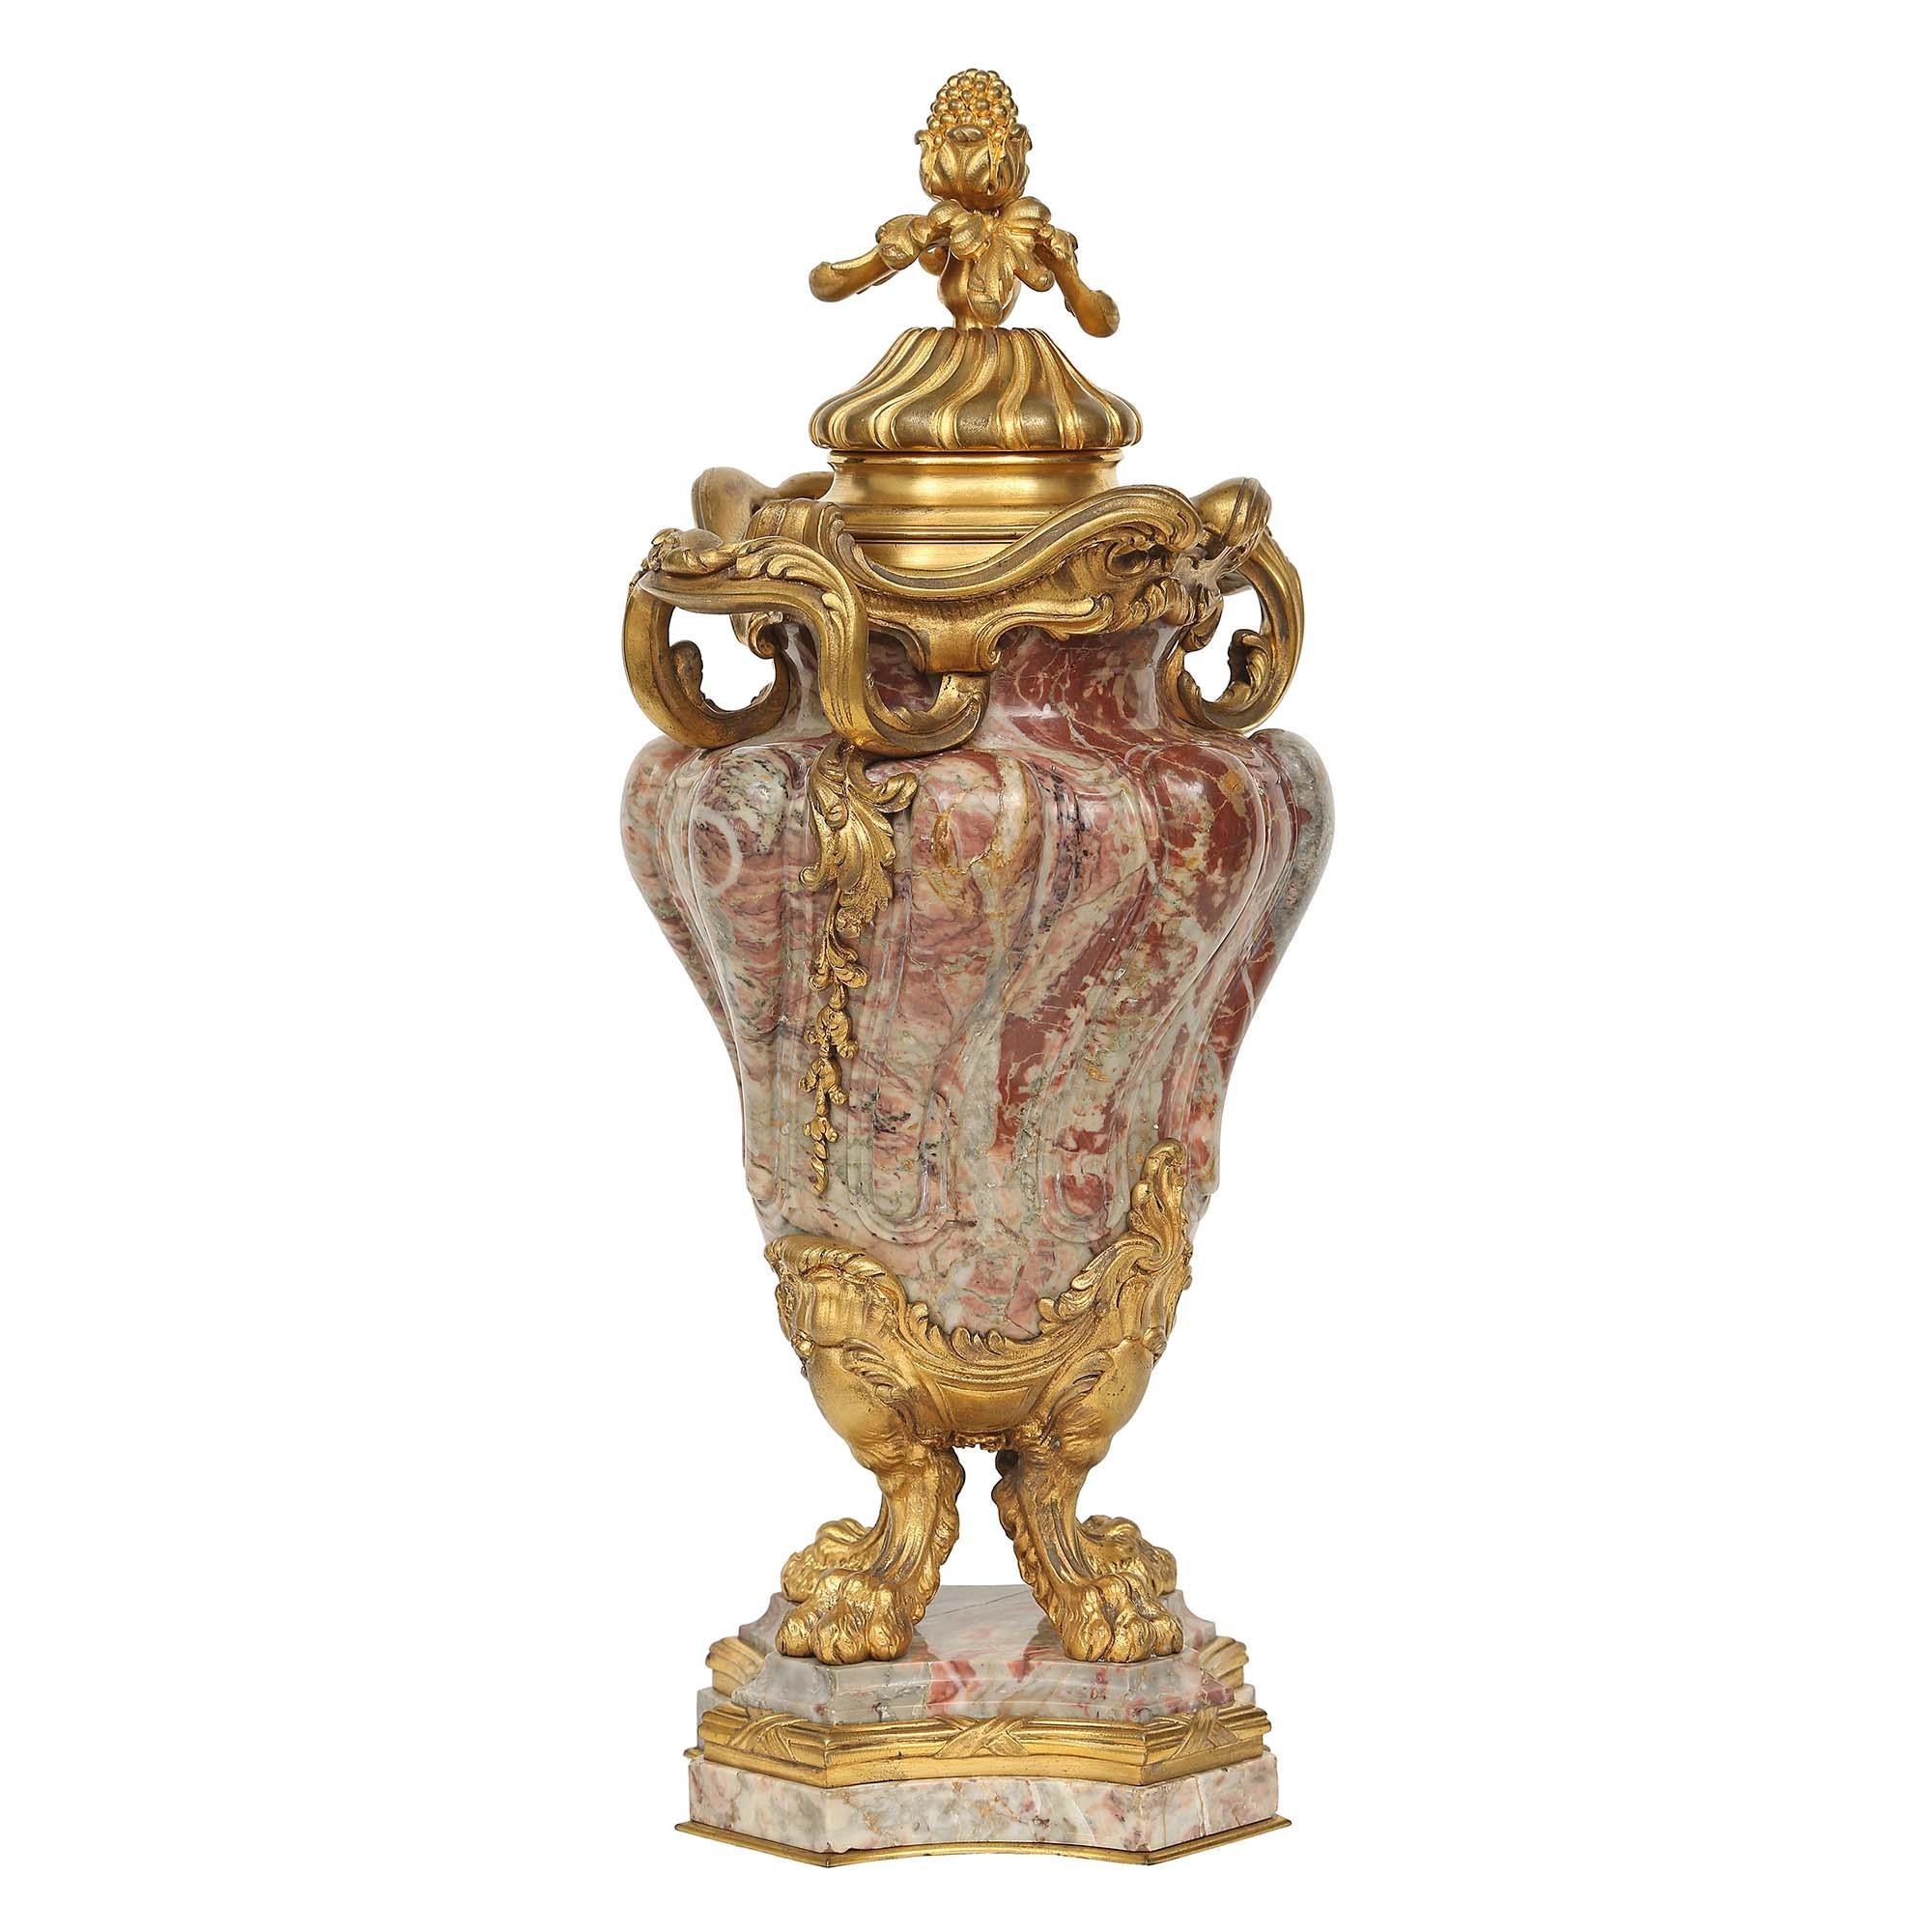 A very impressive French 19th century Louis XVI st. Rouge Royal marble and ormolu urn. Raised on a marble base with canted corners and ormolu moulded band. The urn rests on four ormolu lion paw supports with scrolled acanthus leaf designs. The